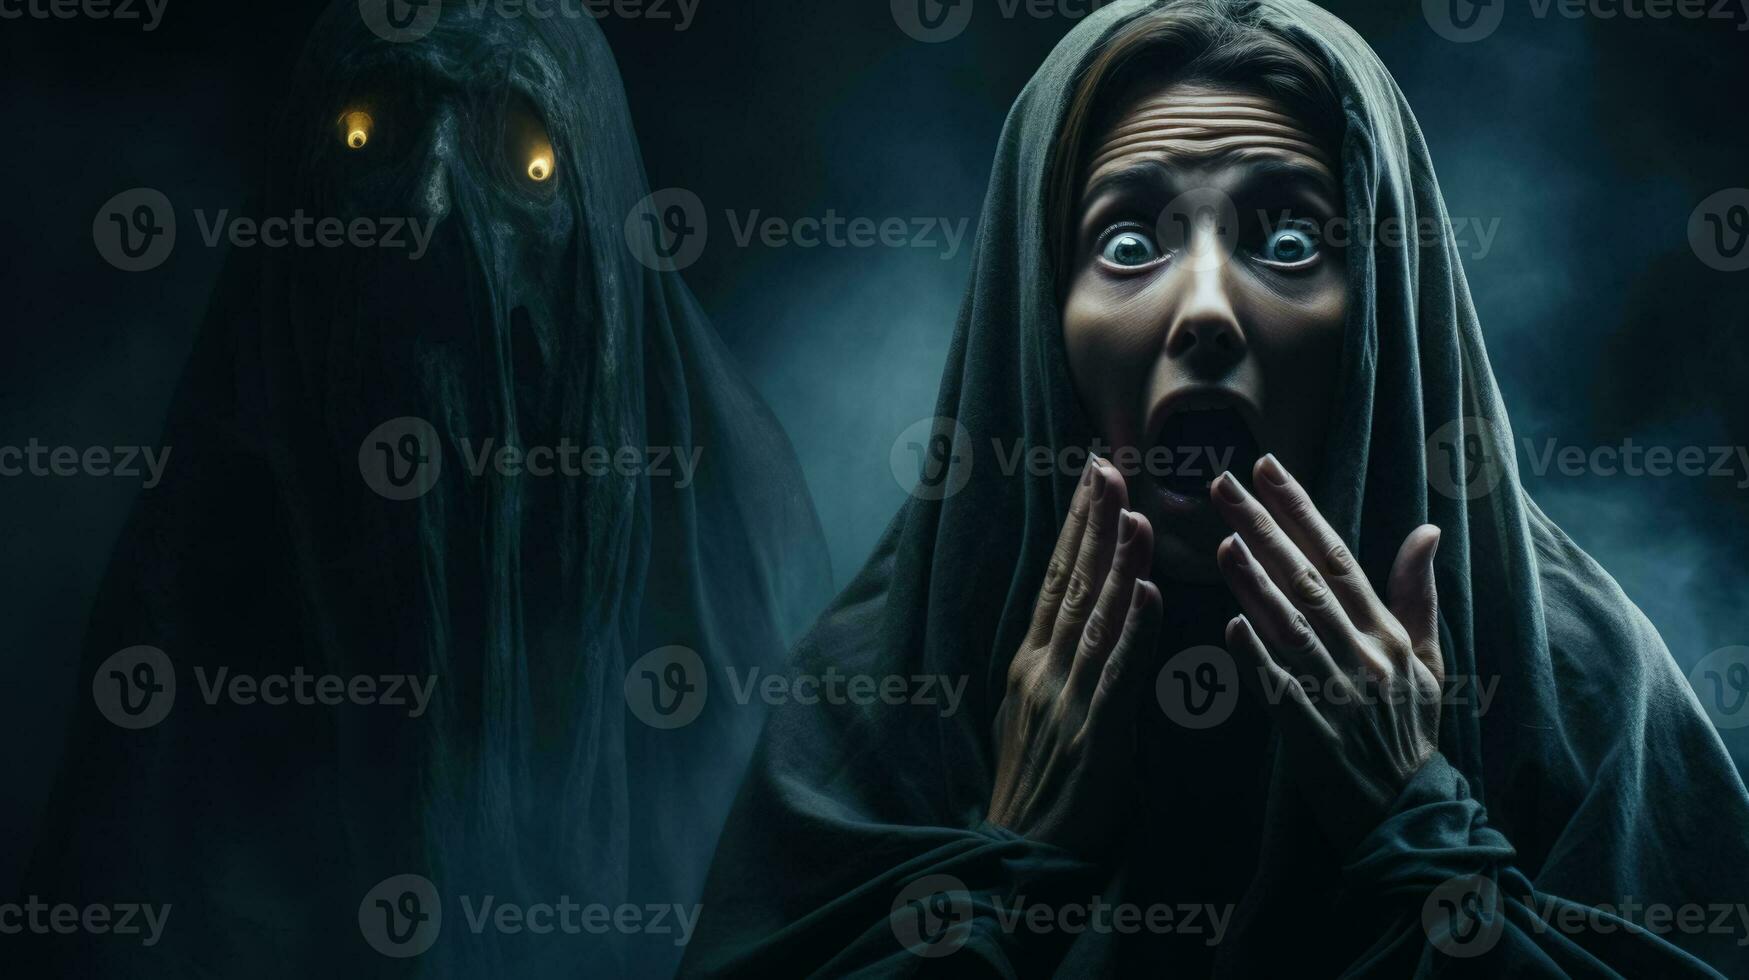 Meeting a deceased loved shocked face on a dark background with a place for text photo